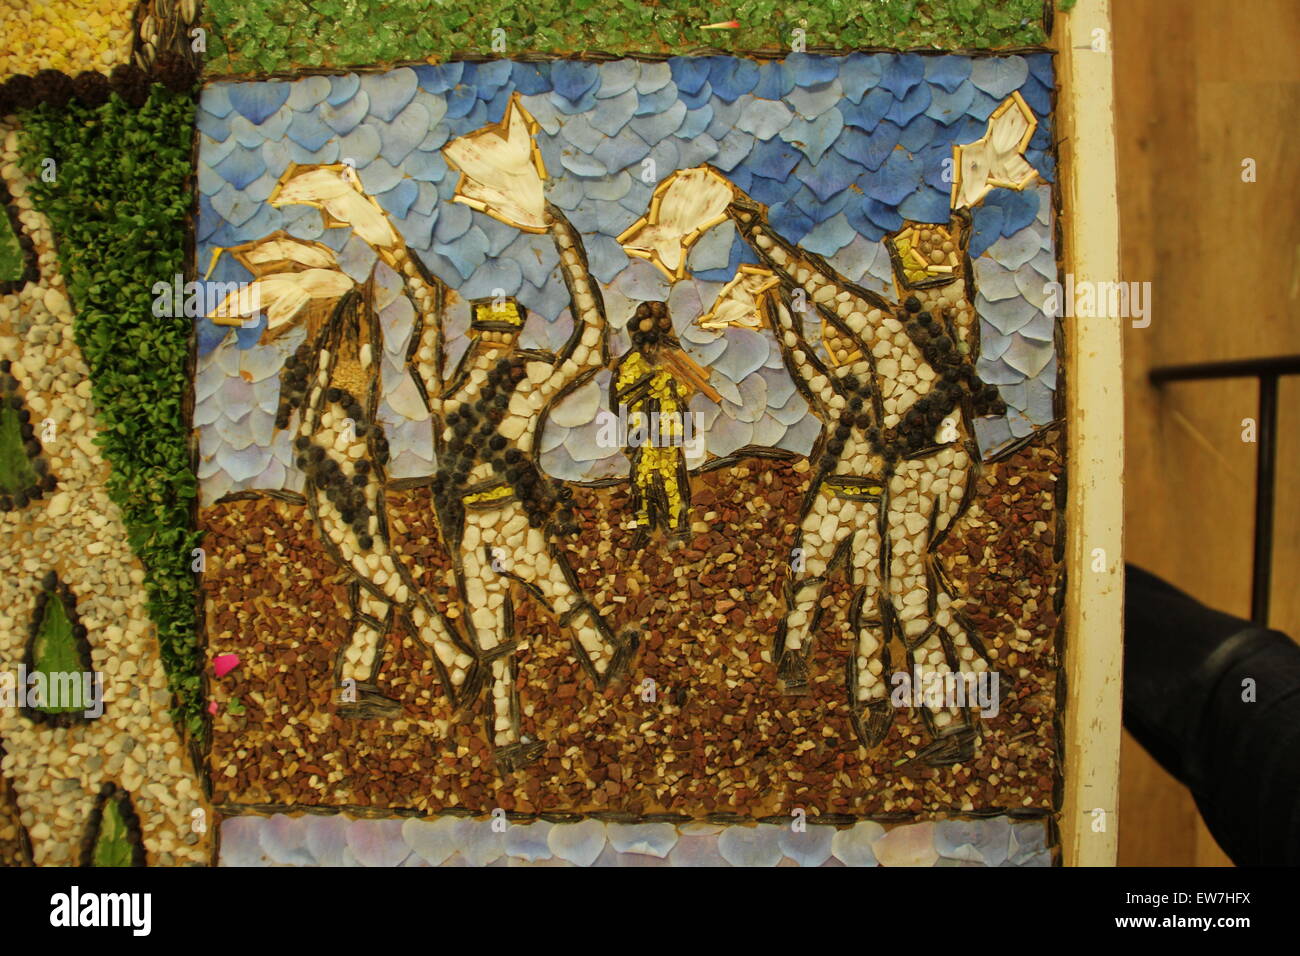 Peak District, Derbyshire, UK. 19 June 2015. Morris dancers are depicted in a well-dressing that will be put on public display at Litton village in the Peak District National Park tomorrow (20/06/2015) for one week. Composed of natural materials like curly parsley, flower petals and peppercorns, well-dressings are an ancient Derbyshire tradition thought to have originated as a way of giving thanks for water from natural springs. Credit:  Deborah Vernon/Alamy Live News Stock Photo